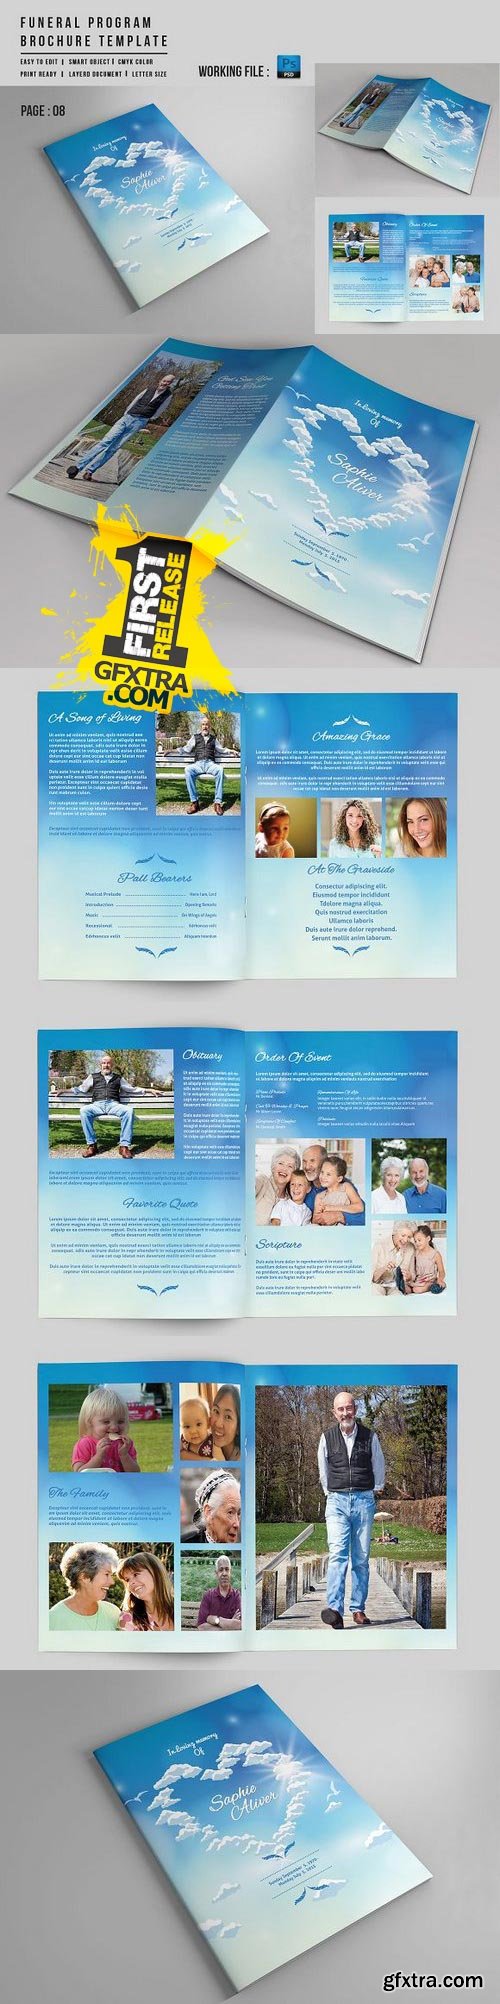 CM - 8 Page Funeral Booklet Template-V527 734377